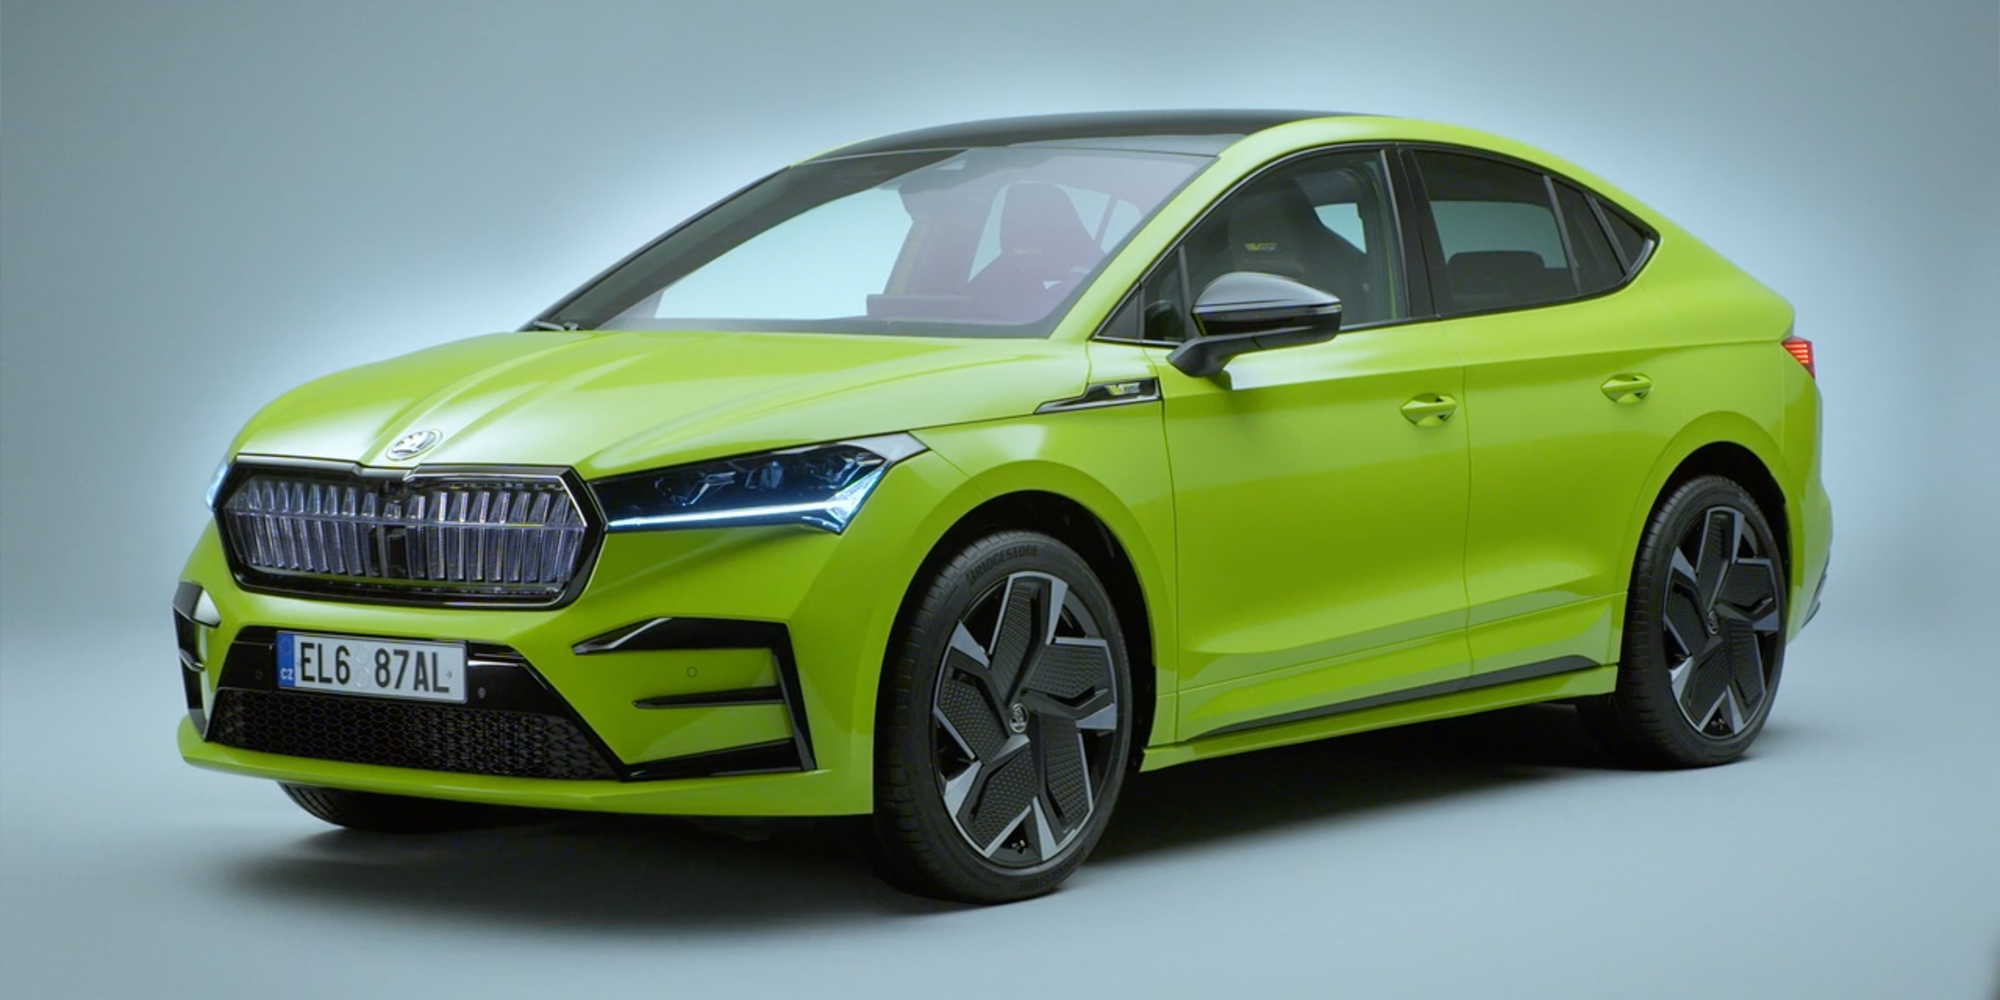 https://electrek.co/wp-content/uploads/sites/3/2022/01/Skoda-Enyaq-Coupe-RS-Side.jpg?quality=82&strip=all